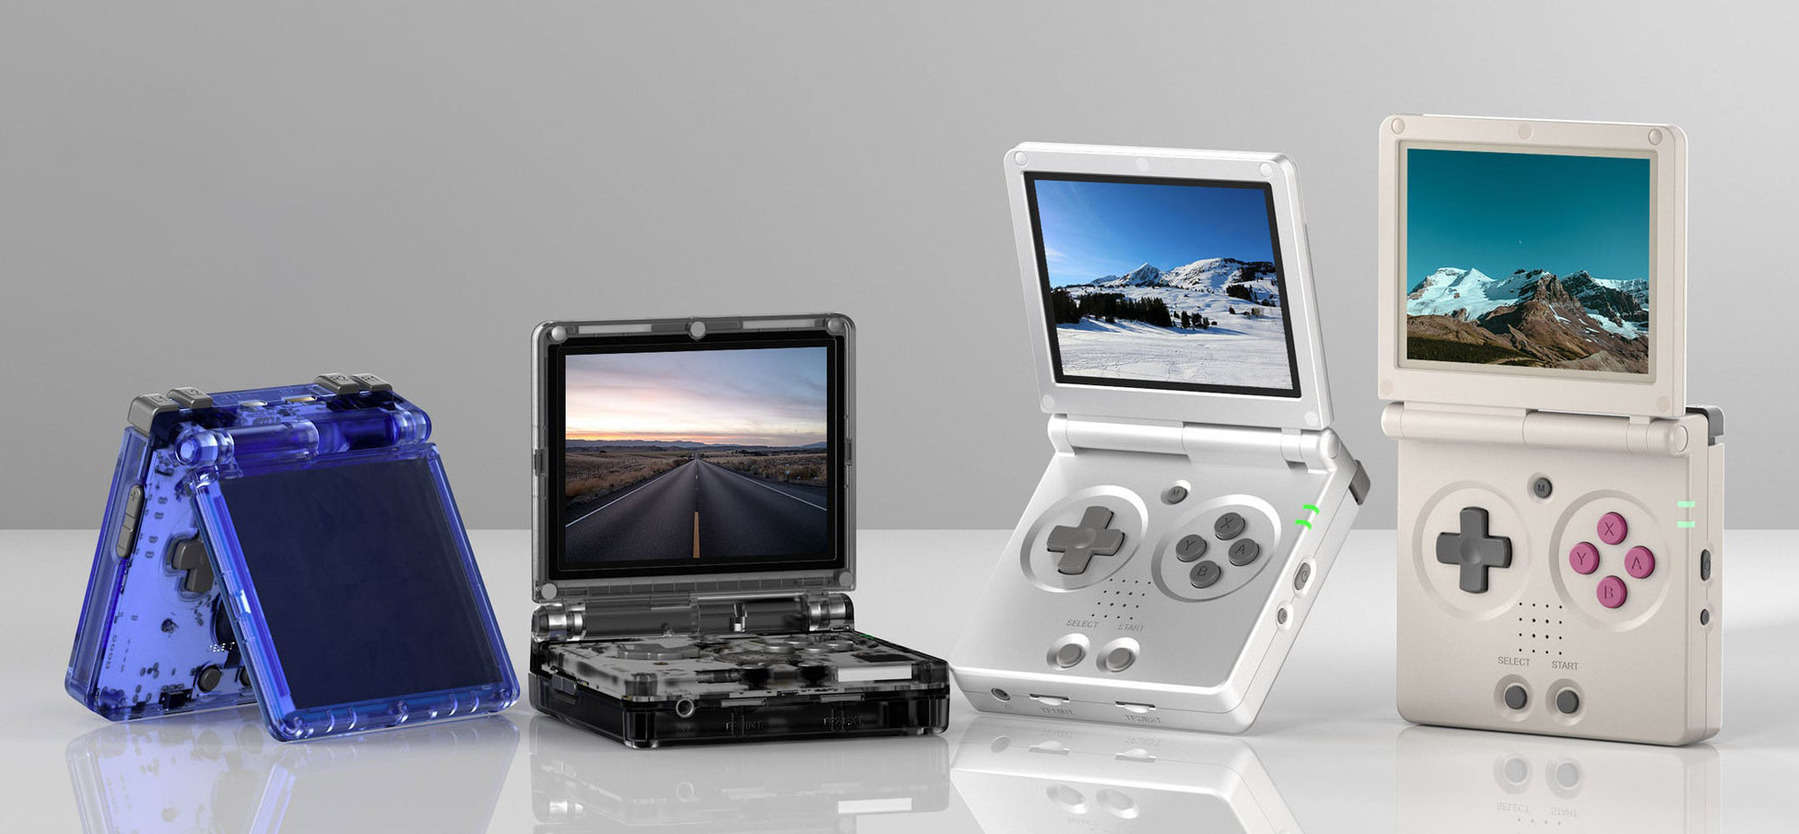 An image showing each of the four colorways of the new Anbernic RG35XXSP gaming portable console.